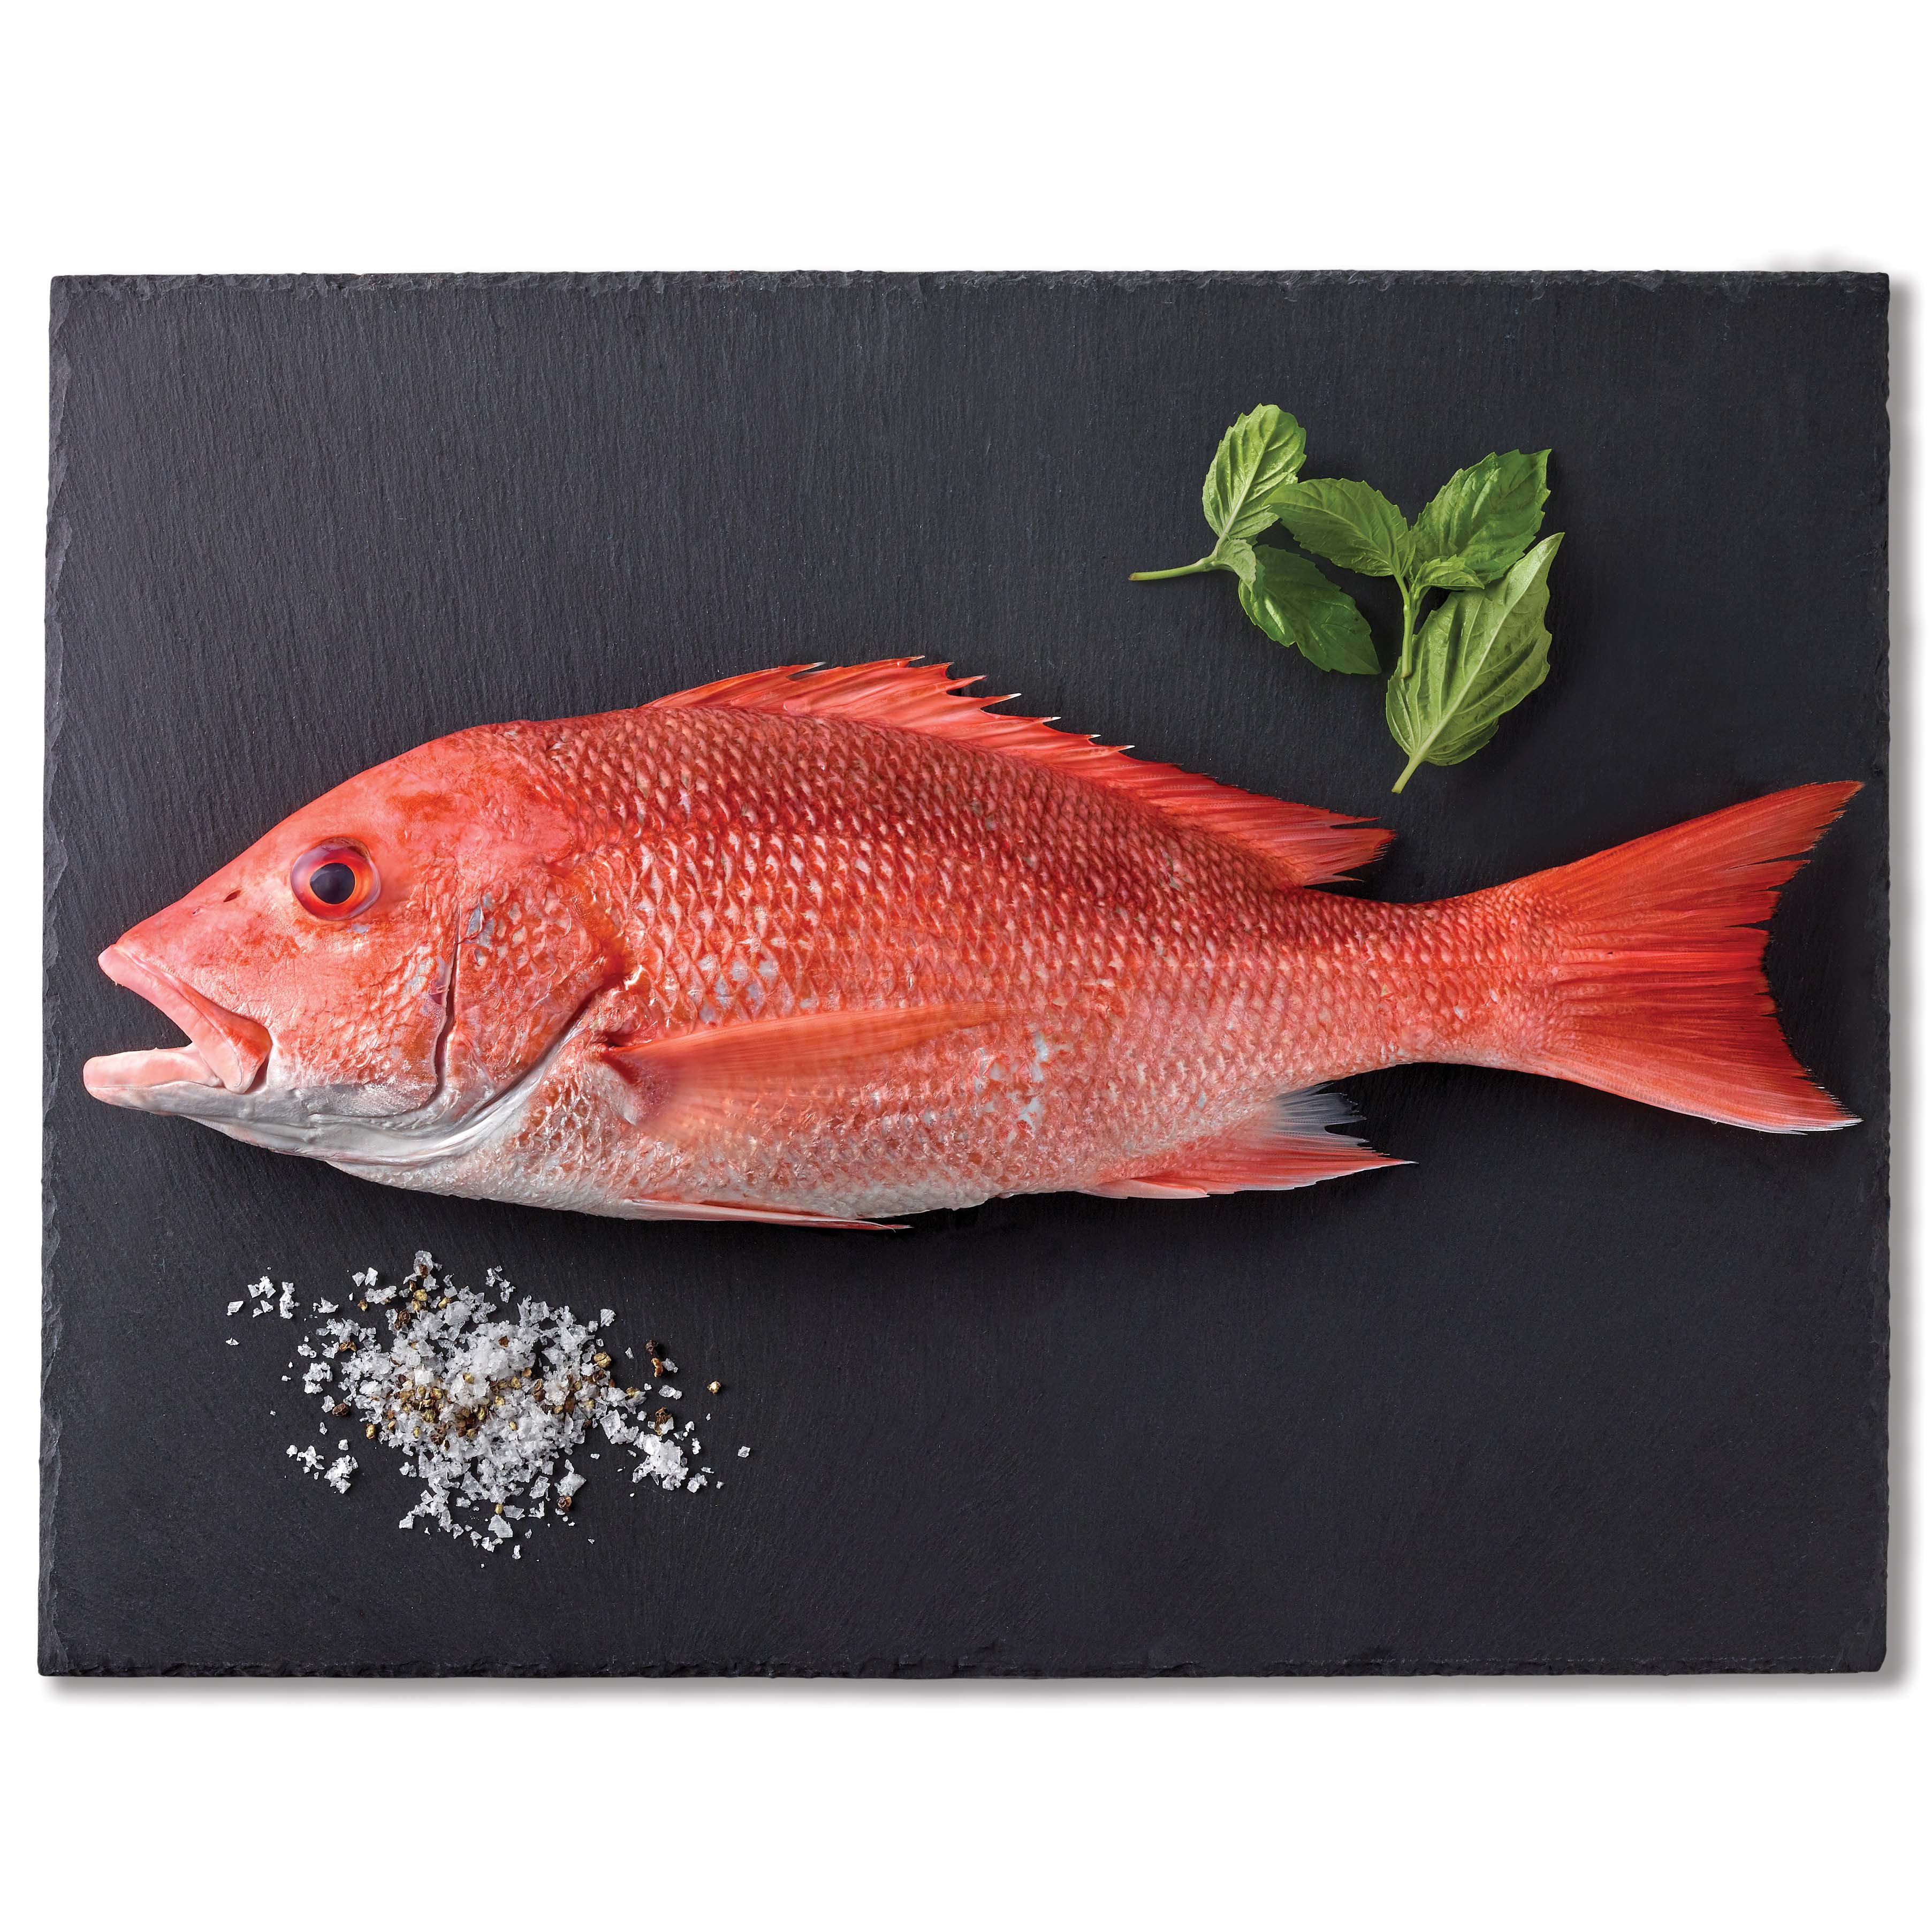 H-E-B Wild Caught Fresh Whole American Red Snapper